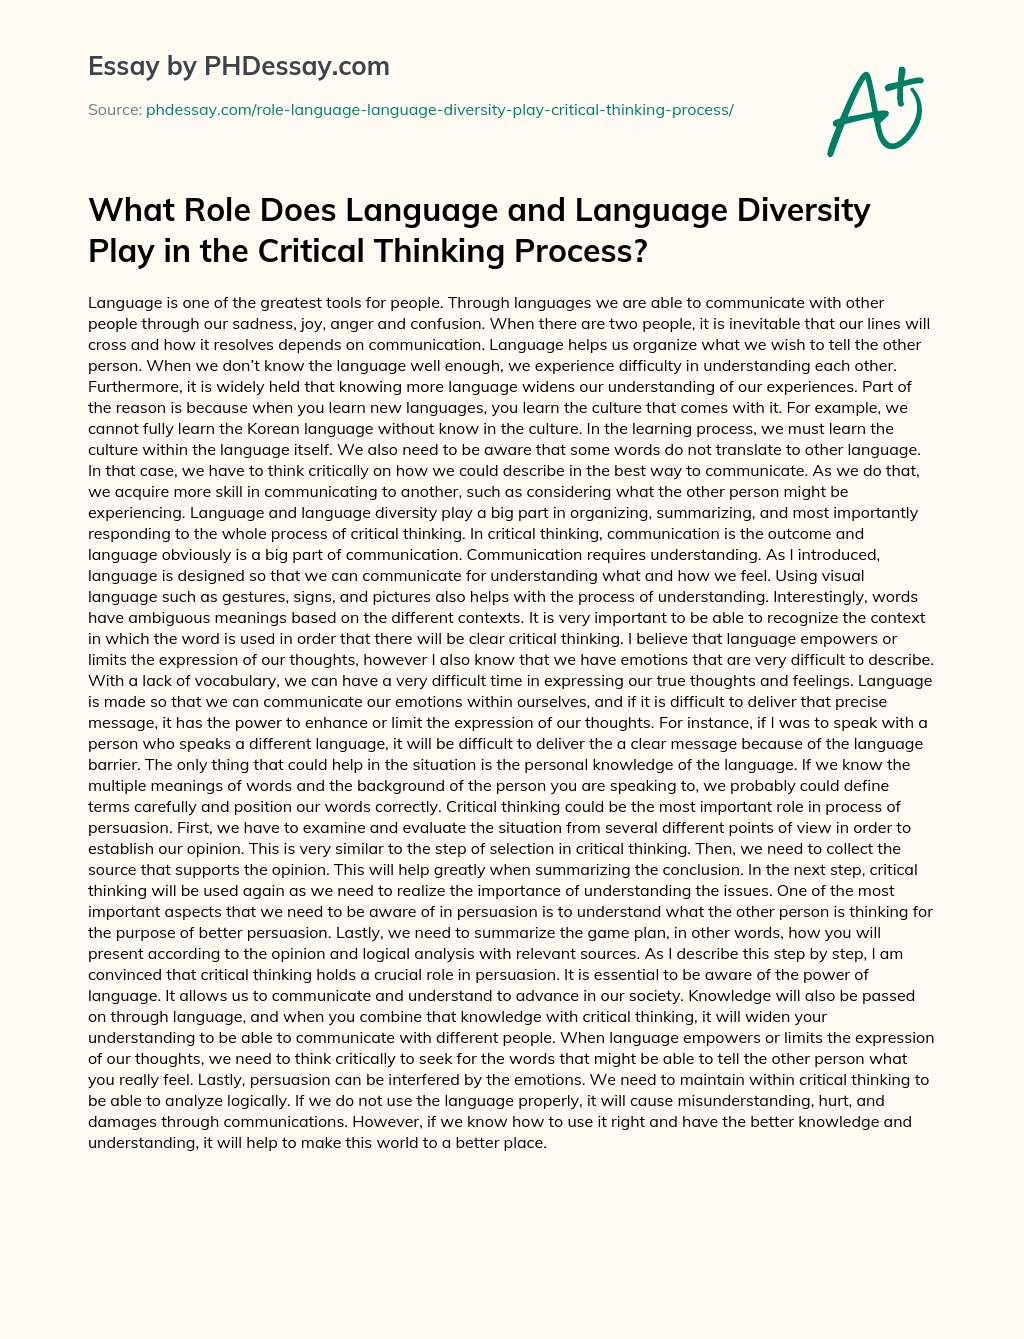 What Role Does Language and Language Diversity Play in the Critical Thinking Process?